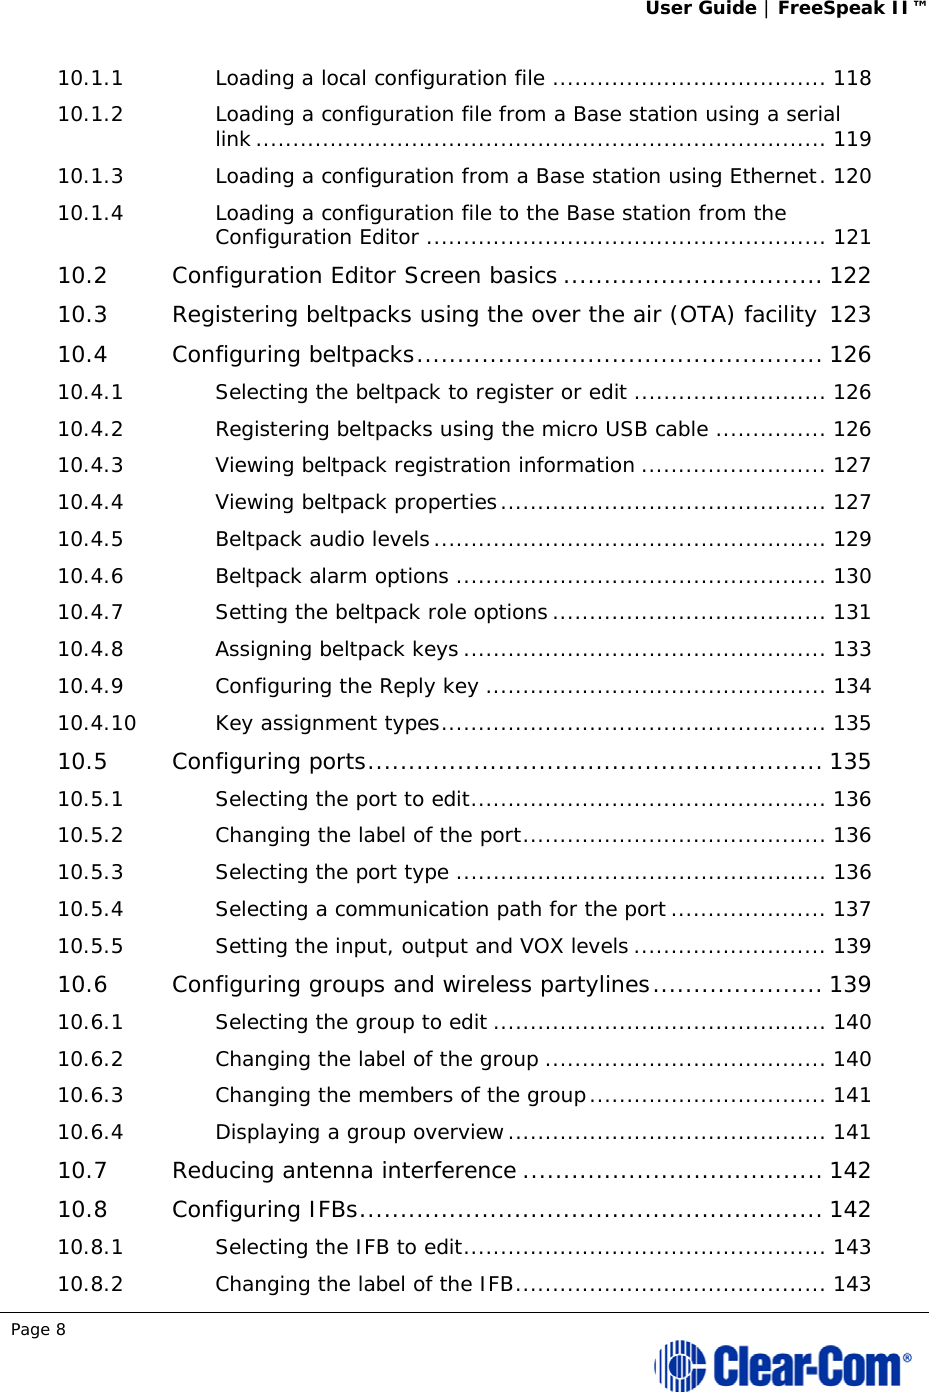 User Guide | FreeSpeak II™  Page 8  10.1.1Loading a local configuration file ..................................... 11810.1.2Loading a configuration file from a Base station using a serial link ............................................................................. 11910.1.3Loading a configuration from a Base station using Ethernet . 12010.1.4Loading a configuration file to the Base station from the Configuration Editor ...................................................... 12110.2Configuration Editor Screen basics ................................ 12210.3Registering beltpacks using the over the air (OTA) facility 12310.4Configuring beltpacks .................................................. 12610.4.1Selecting the beltpack to register or edit .......................... 12610.4.2Registering beltpacks using the micro USB cable ............... 12610.4.3Viewing beltpack registration information ......................... 12710.4.4Viewing beltpack properties ............................................ 12710.4.5Beltpack audio levels ..................................................... 12910.4.6Beltpack alarm options .................................................. 13010.4.7Setting the beltpack role options ..................................... 13110.4.8Assigning beltpack keys ................................................. 13310.4.9Configuring the Reply key .............................................. 13410.4.10Key assignment types .................................................... 13510.5Configuring ports ........................................................ 13510.5.1Selecting the port to edit ................................................ 13610.5.2Changing the label of the port ......................................... 13610.5.3Selecting the port type .................................................. 13610.5.4Selecting a communication path for the port ..................... 13710.5.5Setting the input, output and VOX levels .......................... 13910.6Configuring groups and wireless partylines ..................... 13910.6.1Selecting the group to edit ............................................. 14010.6.2Changing the label of the group ...................................... 14010.6.3Changing the members of the group ................................ 14110.6.4Displaying a group overview ........................................... 14110.7Reducing antenna interference ..................................... 14210.8Configuring IFBs ......................................................... 14210.8.1Selecting the IFB to edit ................................................. 14310.8.2Changing the label of the IFB .......................................... 143